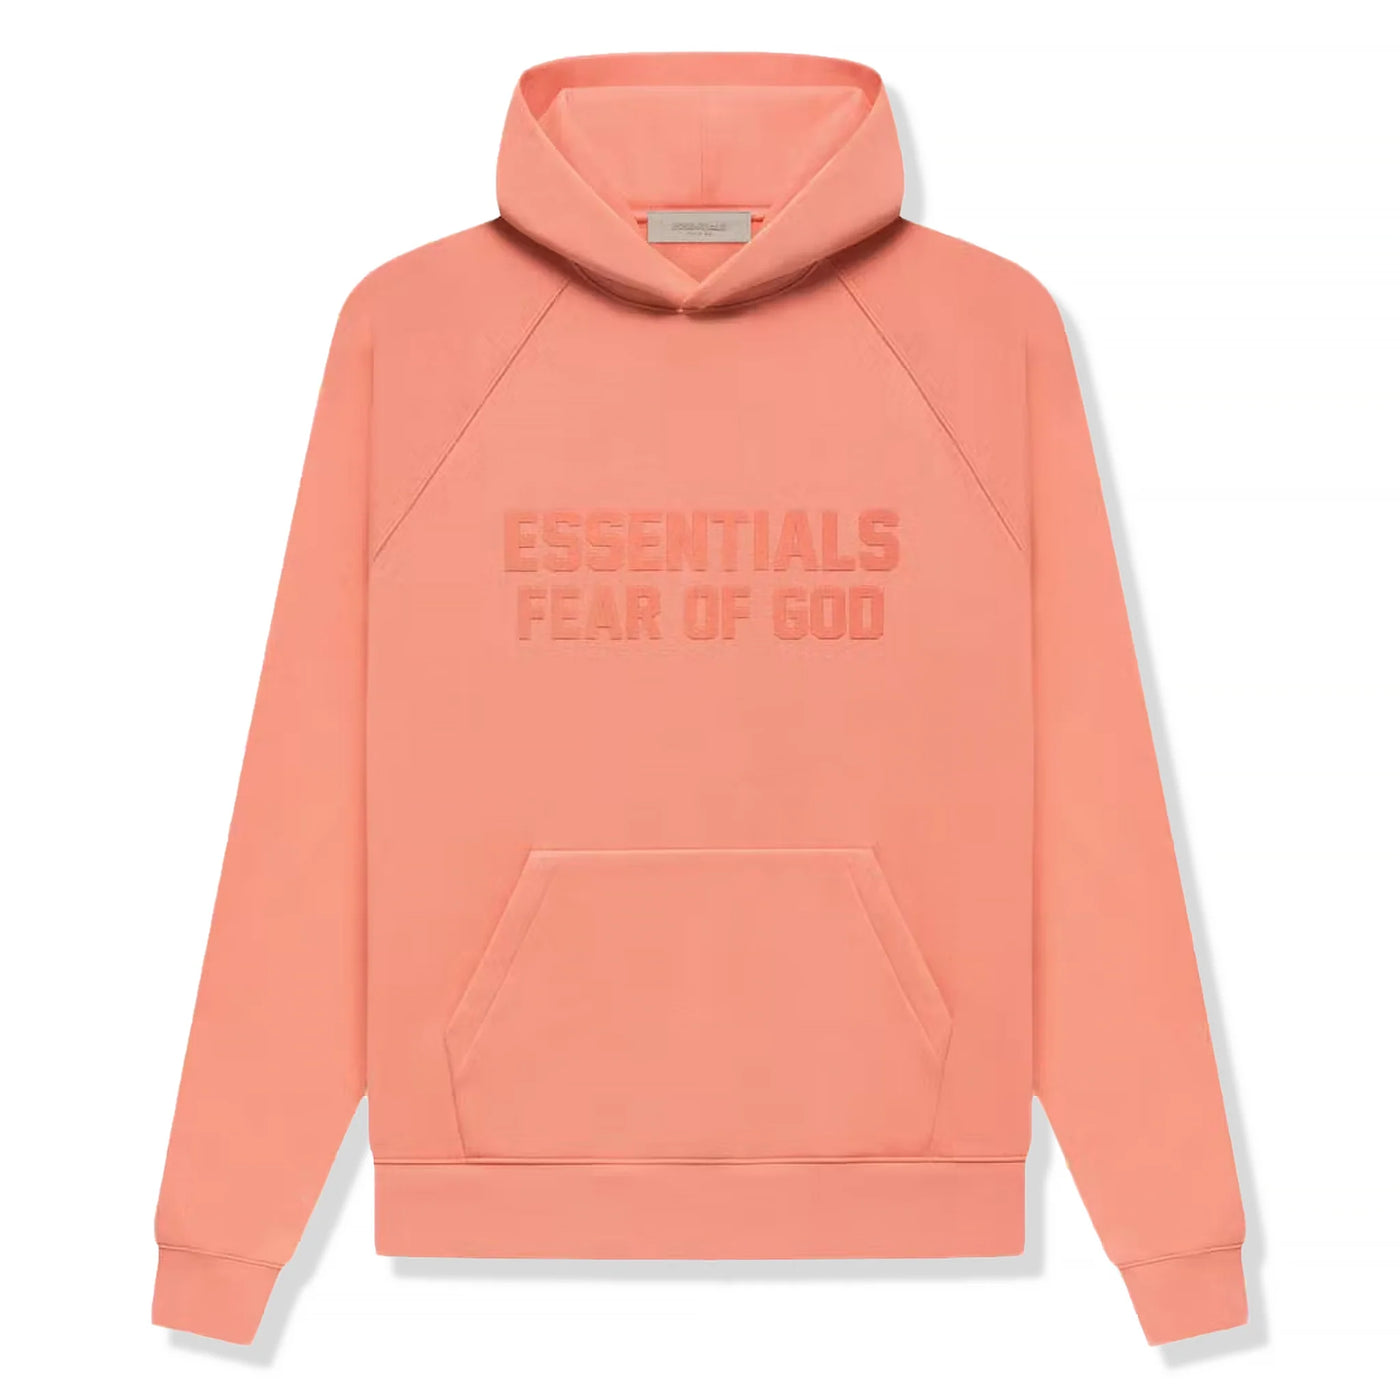 ESSENTIALS FEAR OF GOD CORAL  SET - M SNEAKERS